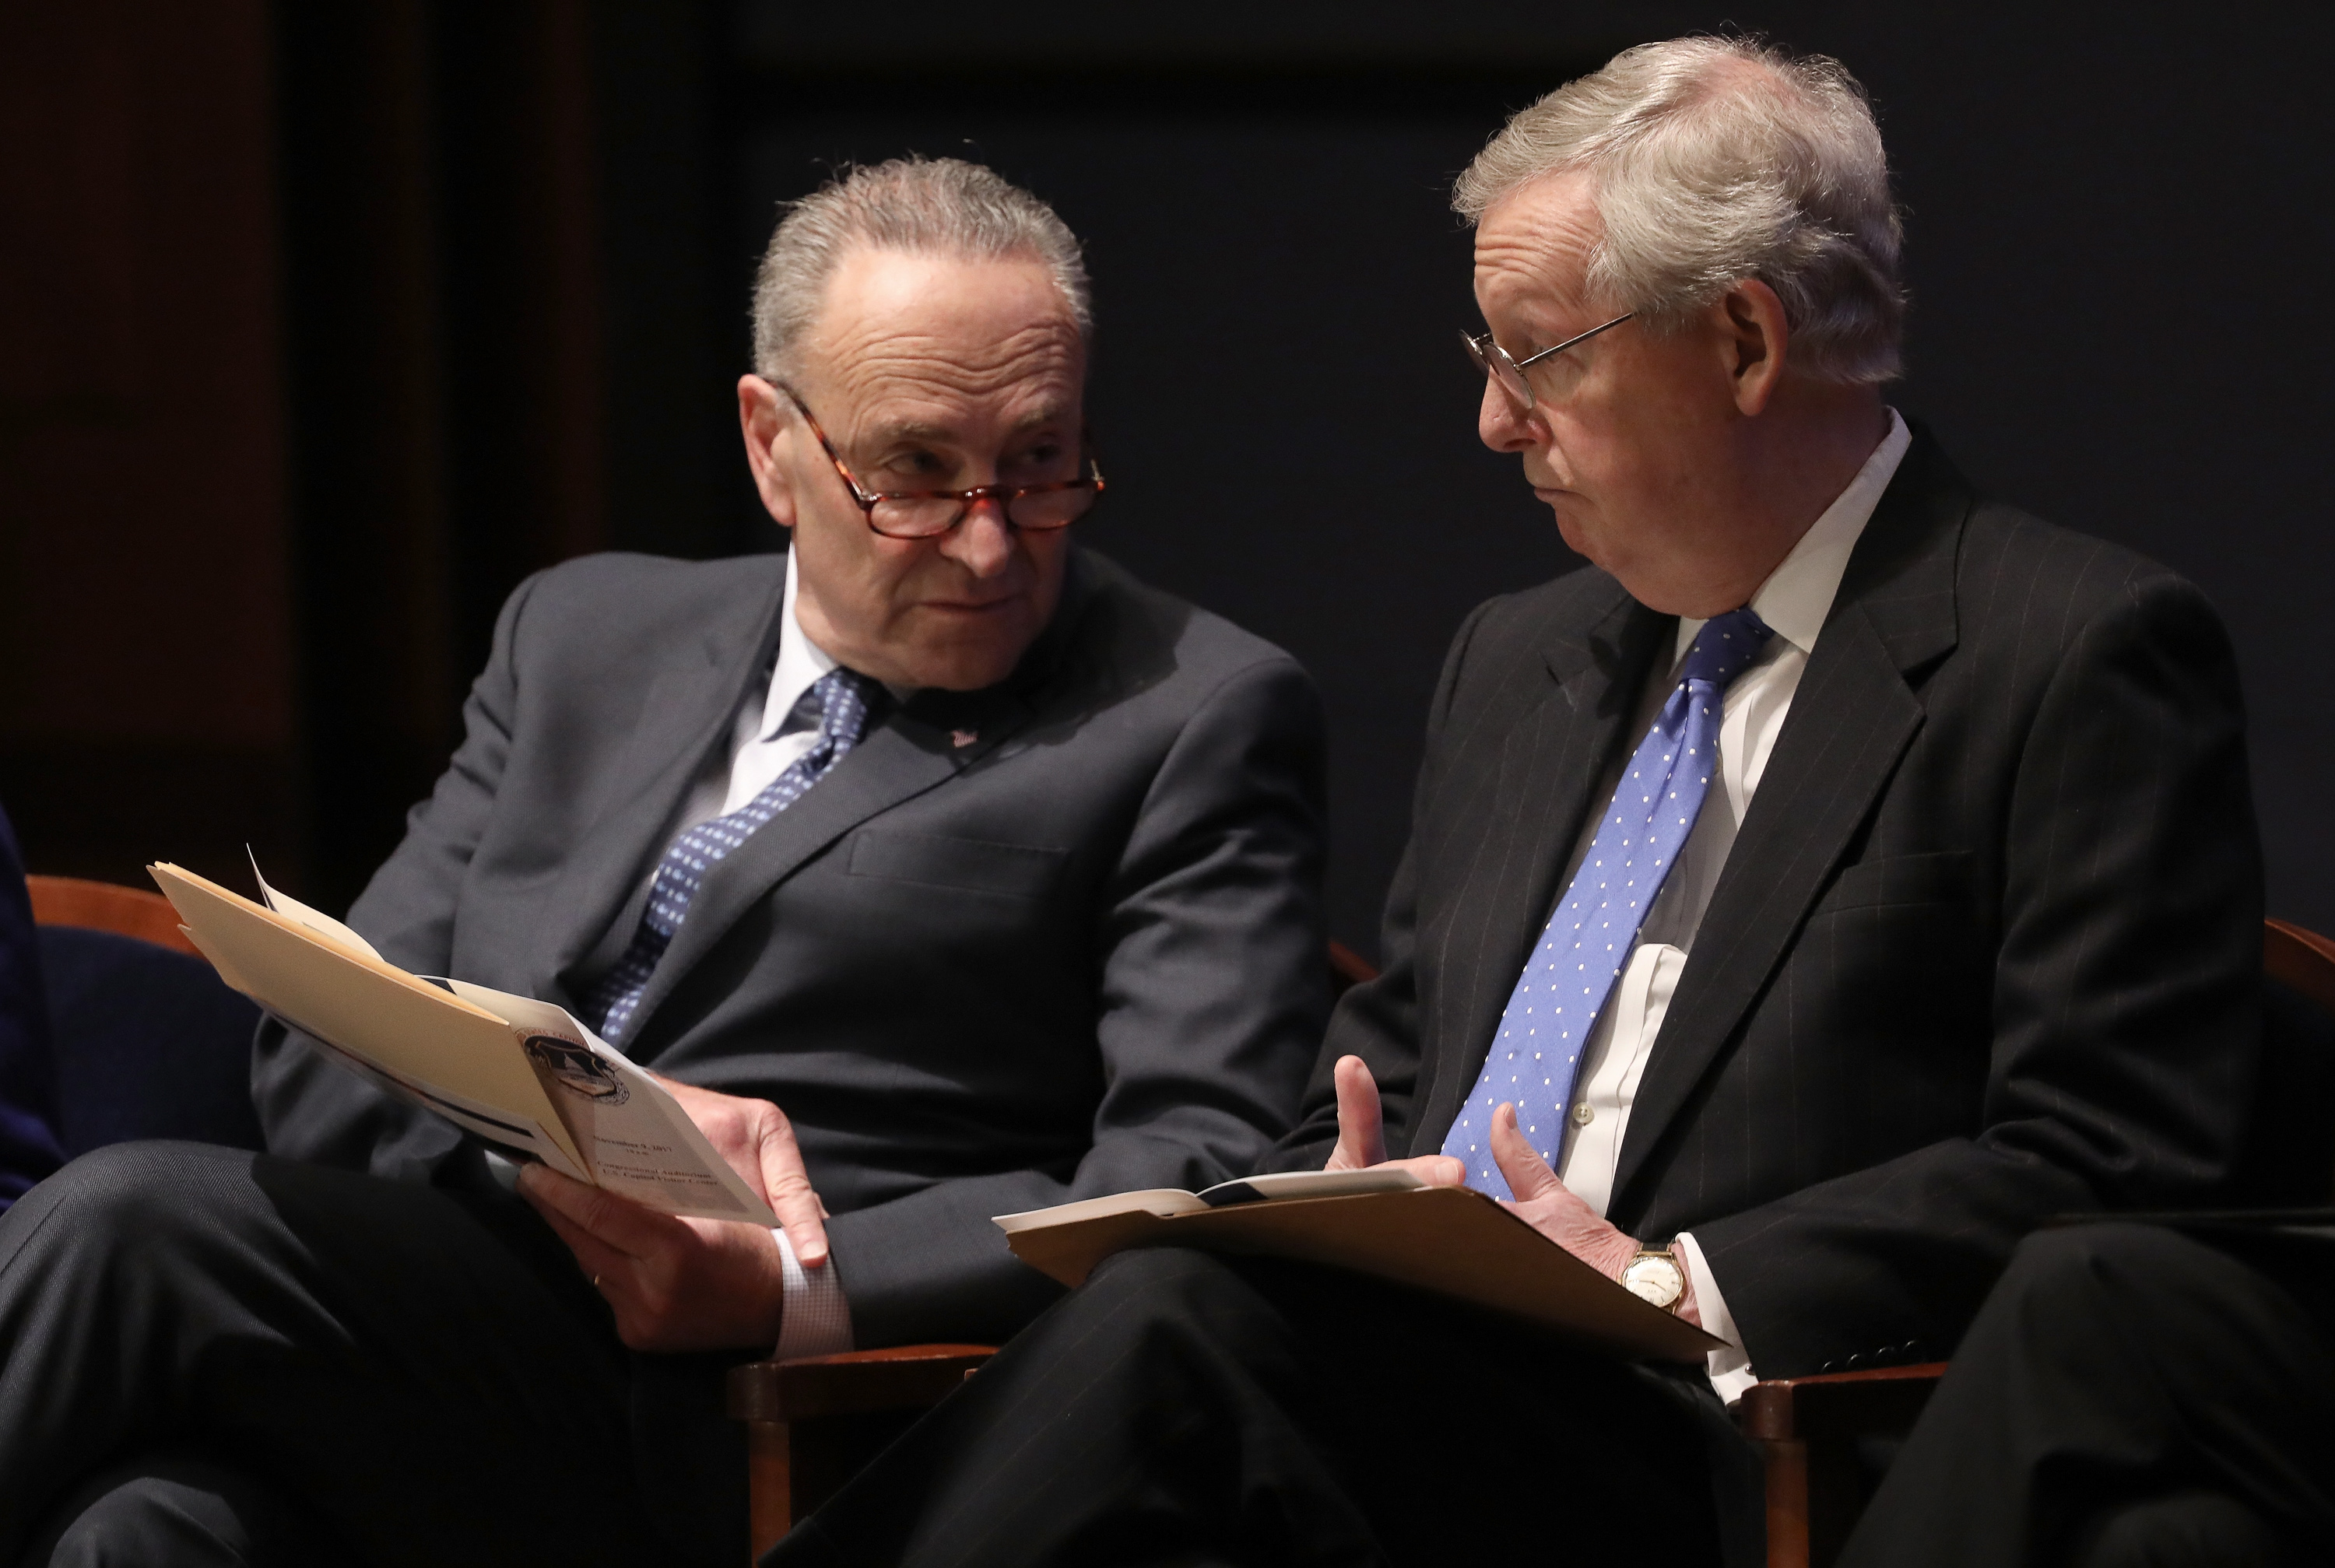 Chuck Schumer and Mitch McConnell chat